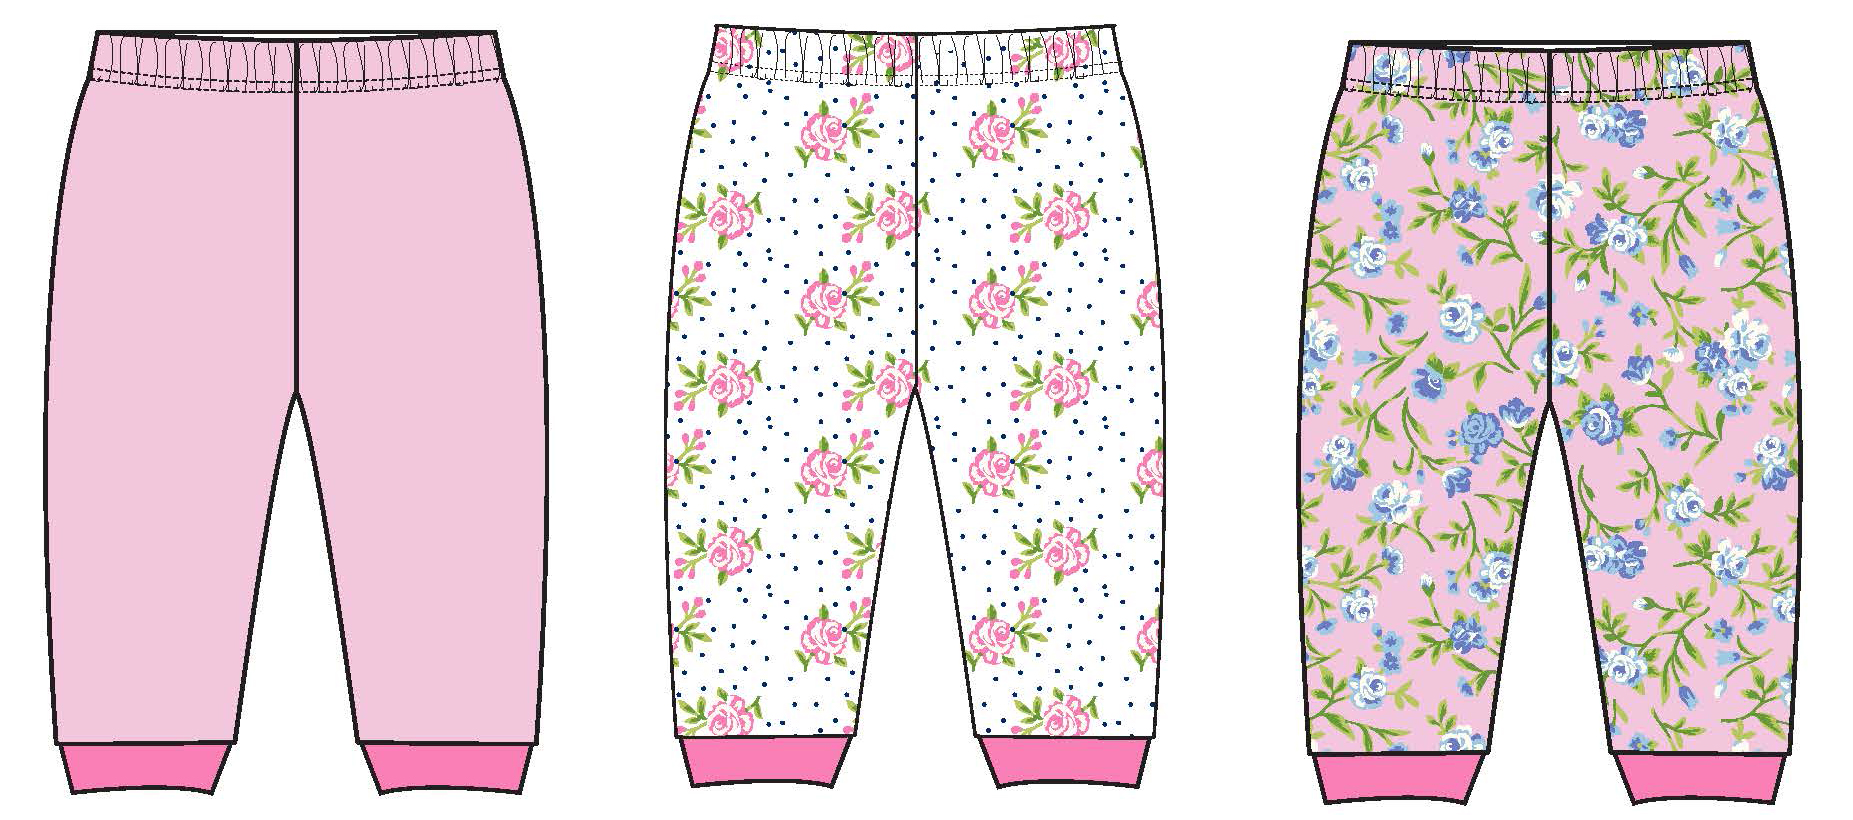 ''Baby Girl's Printed Pull-On PANTS w/ Daisy Flower, Polka Dot, & Solid Print -Sizes 12M-24M - 3-Pack